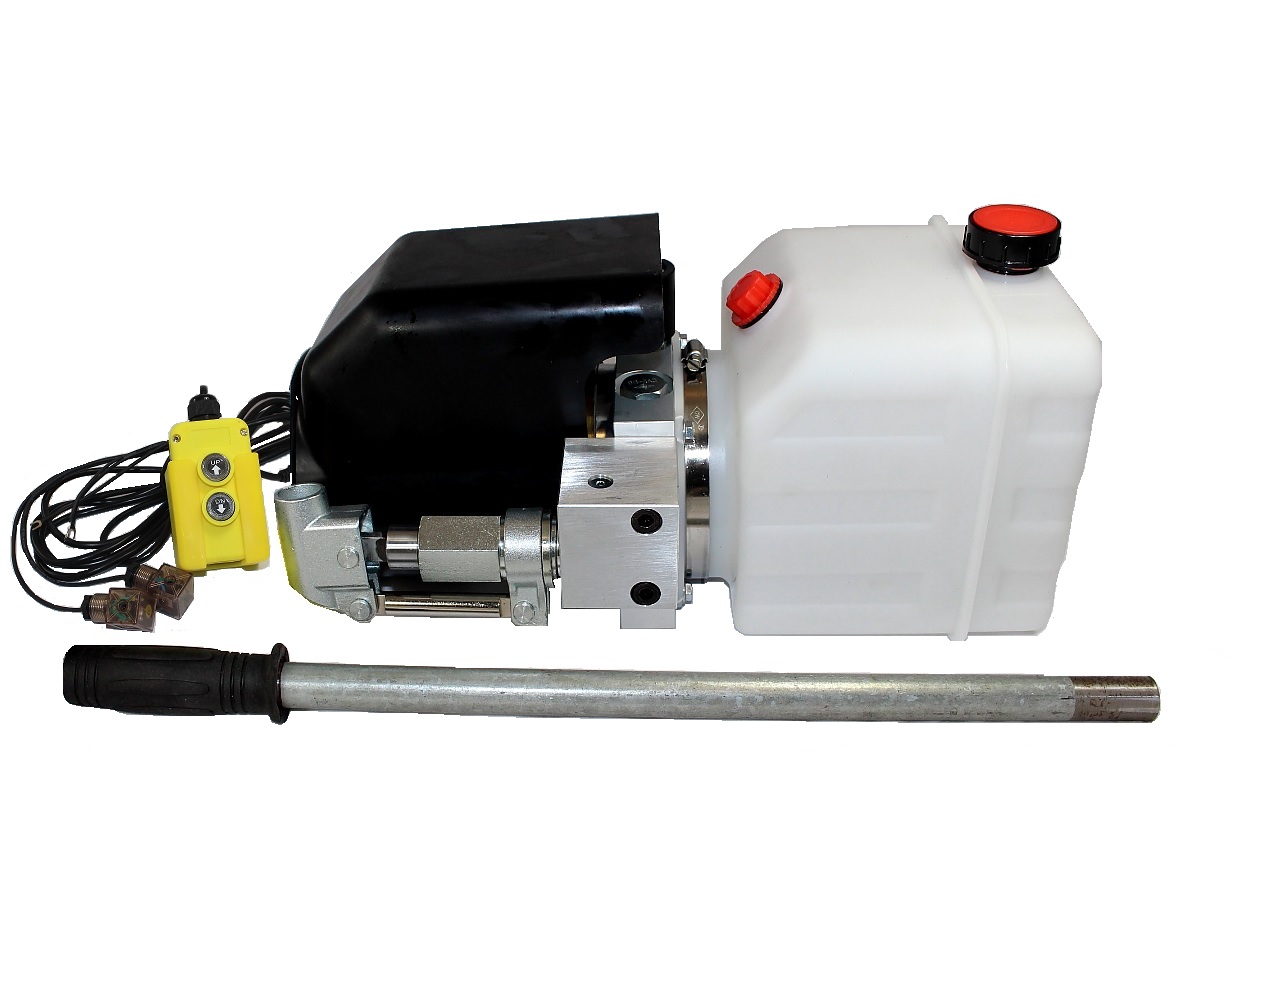 Flowfit 24V DC Single Acting Hydraulic Power pack 2KW with 4.5L Tank, Back Up Hand Pump & Wireless Remote